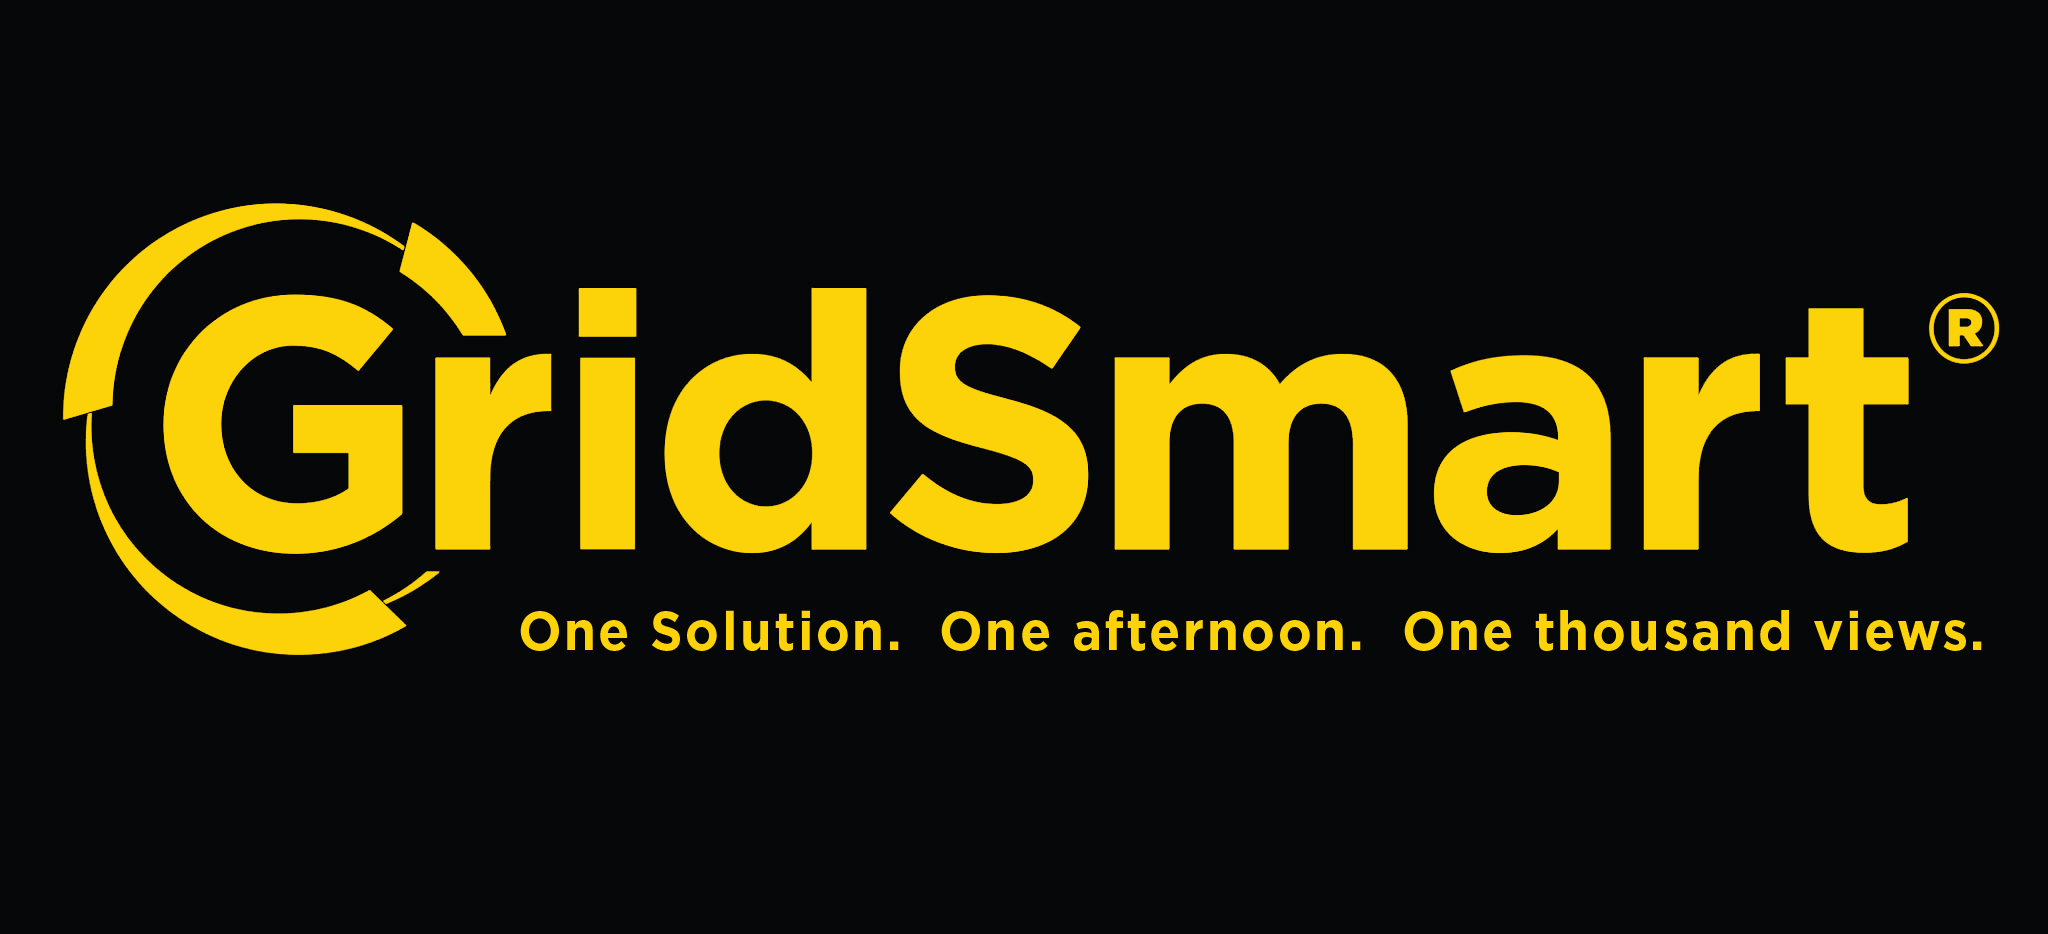 GridSmart: One solution. One afternoon. One thousand views.